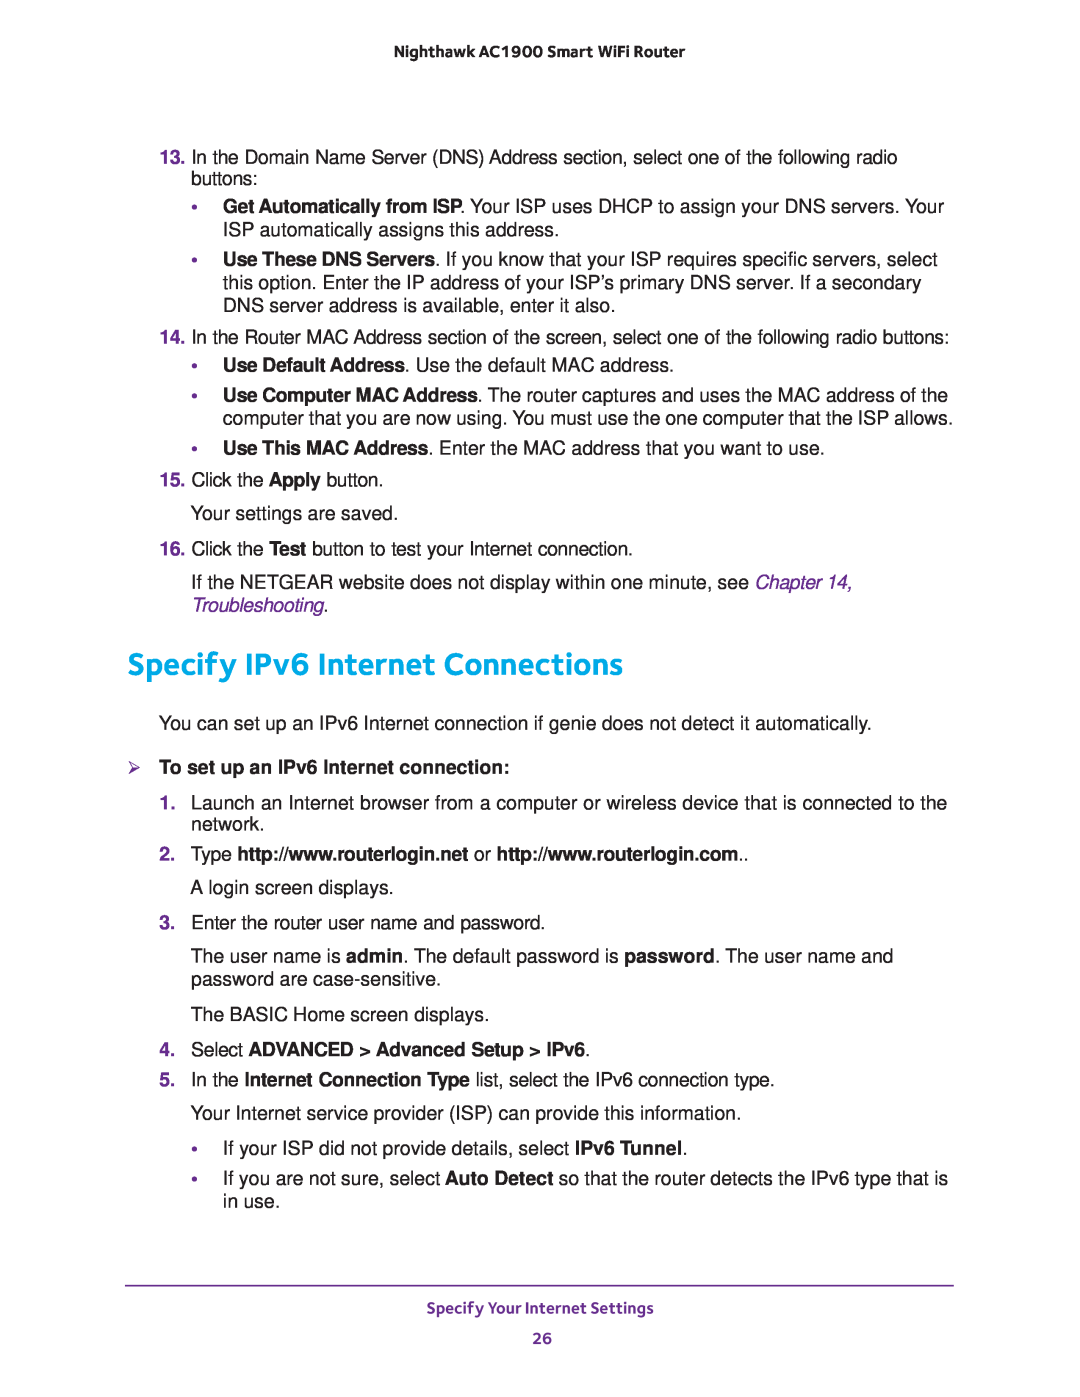 NETGEAR Model R7000 user manual Specify IPv6 Internet Connections,  To set up an IPv6 Internet connection 